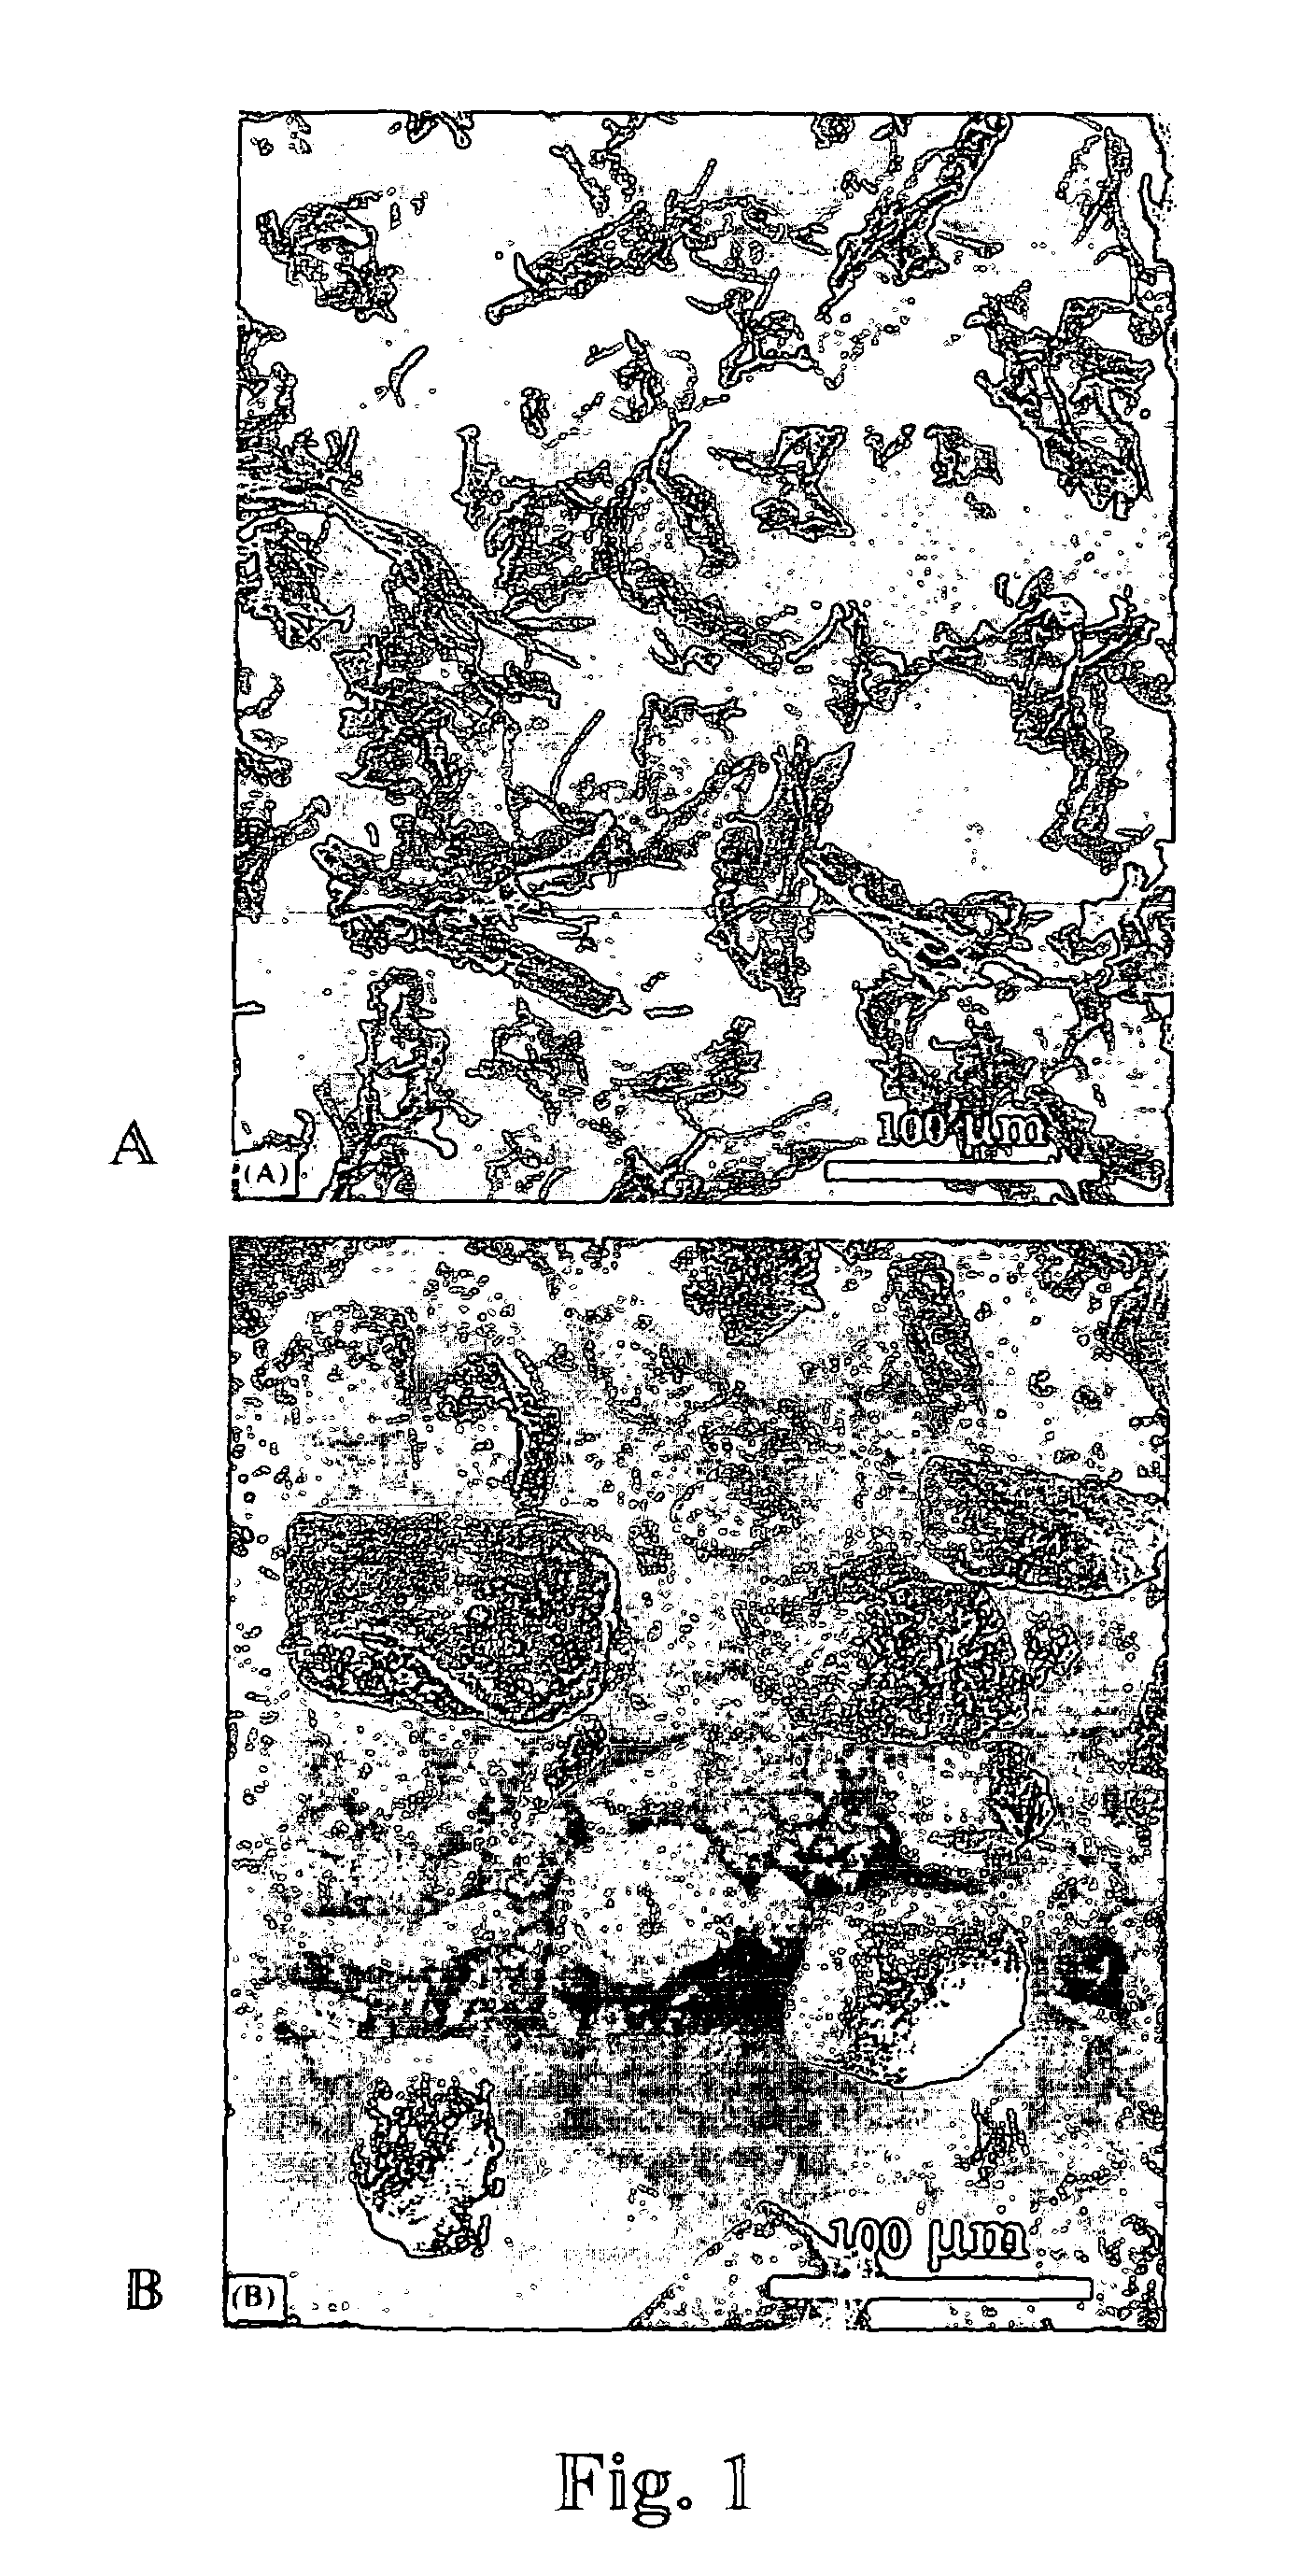 Porous polymeric matrices made of natural polymers and synthetic polymers and optionally at least one cation and methods of making